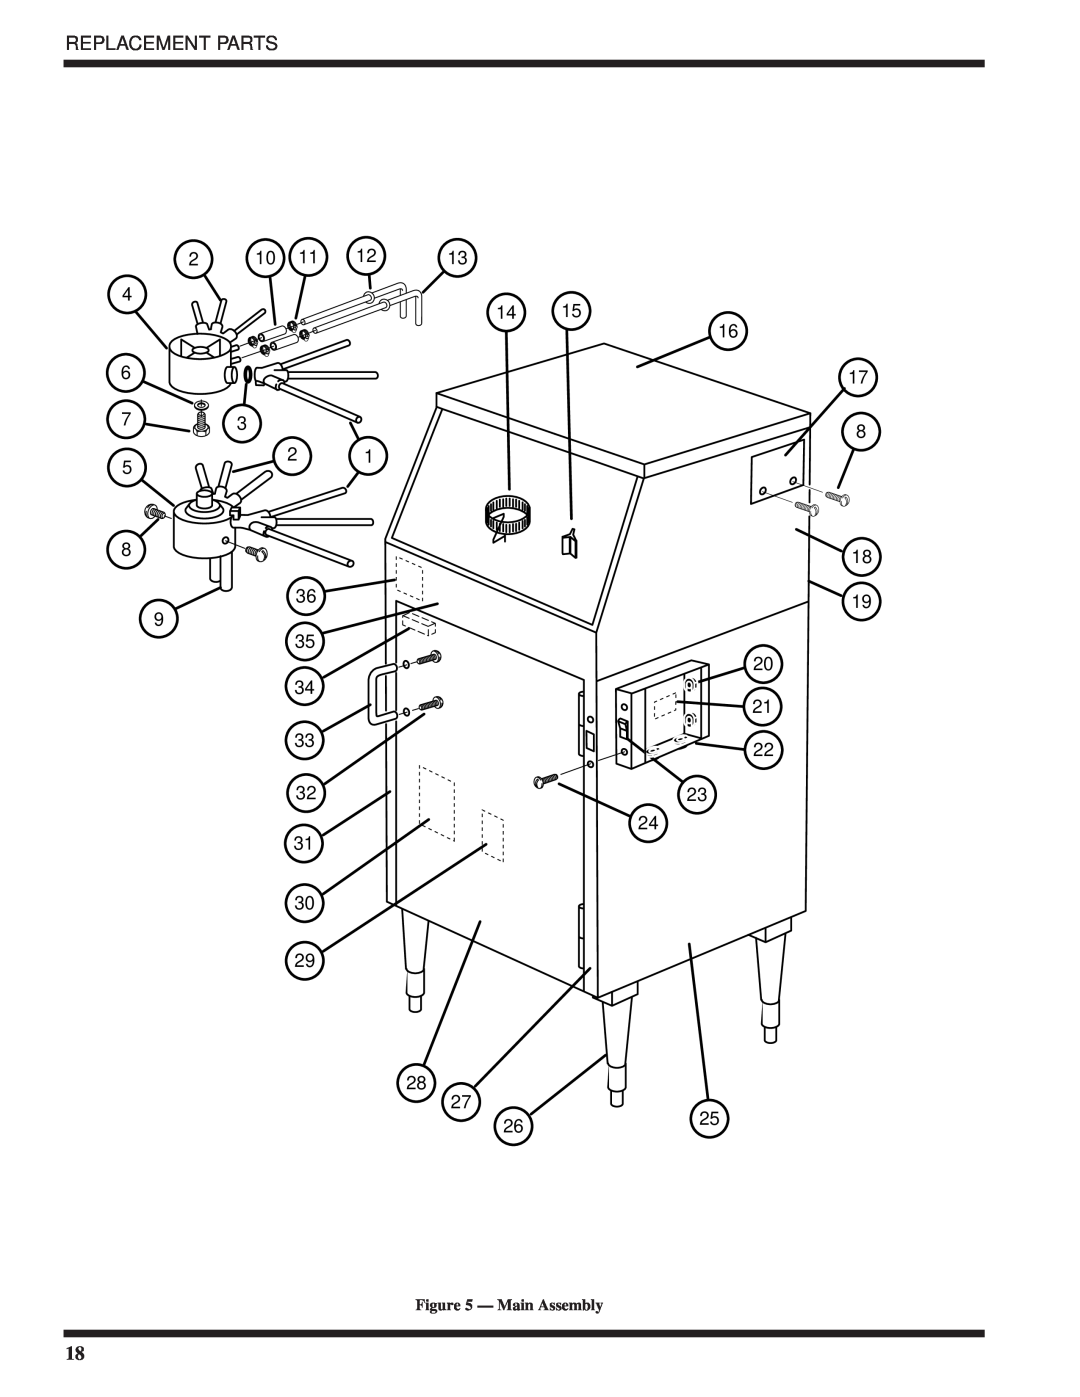 Moyer Diebel DF2-M6, DF-M6, DF1-M6 technical manual Replacement Parts, 2625, Main Assembly 